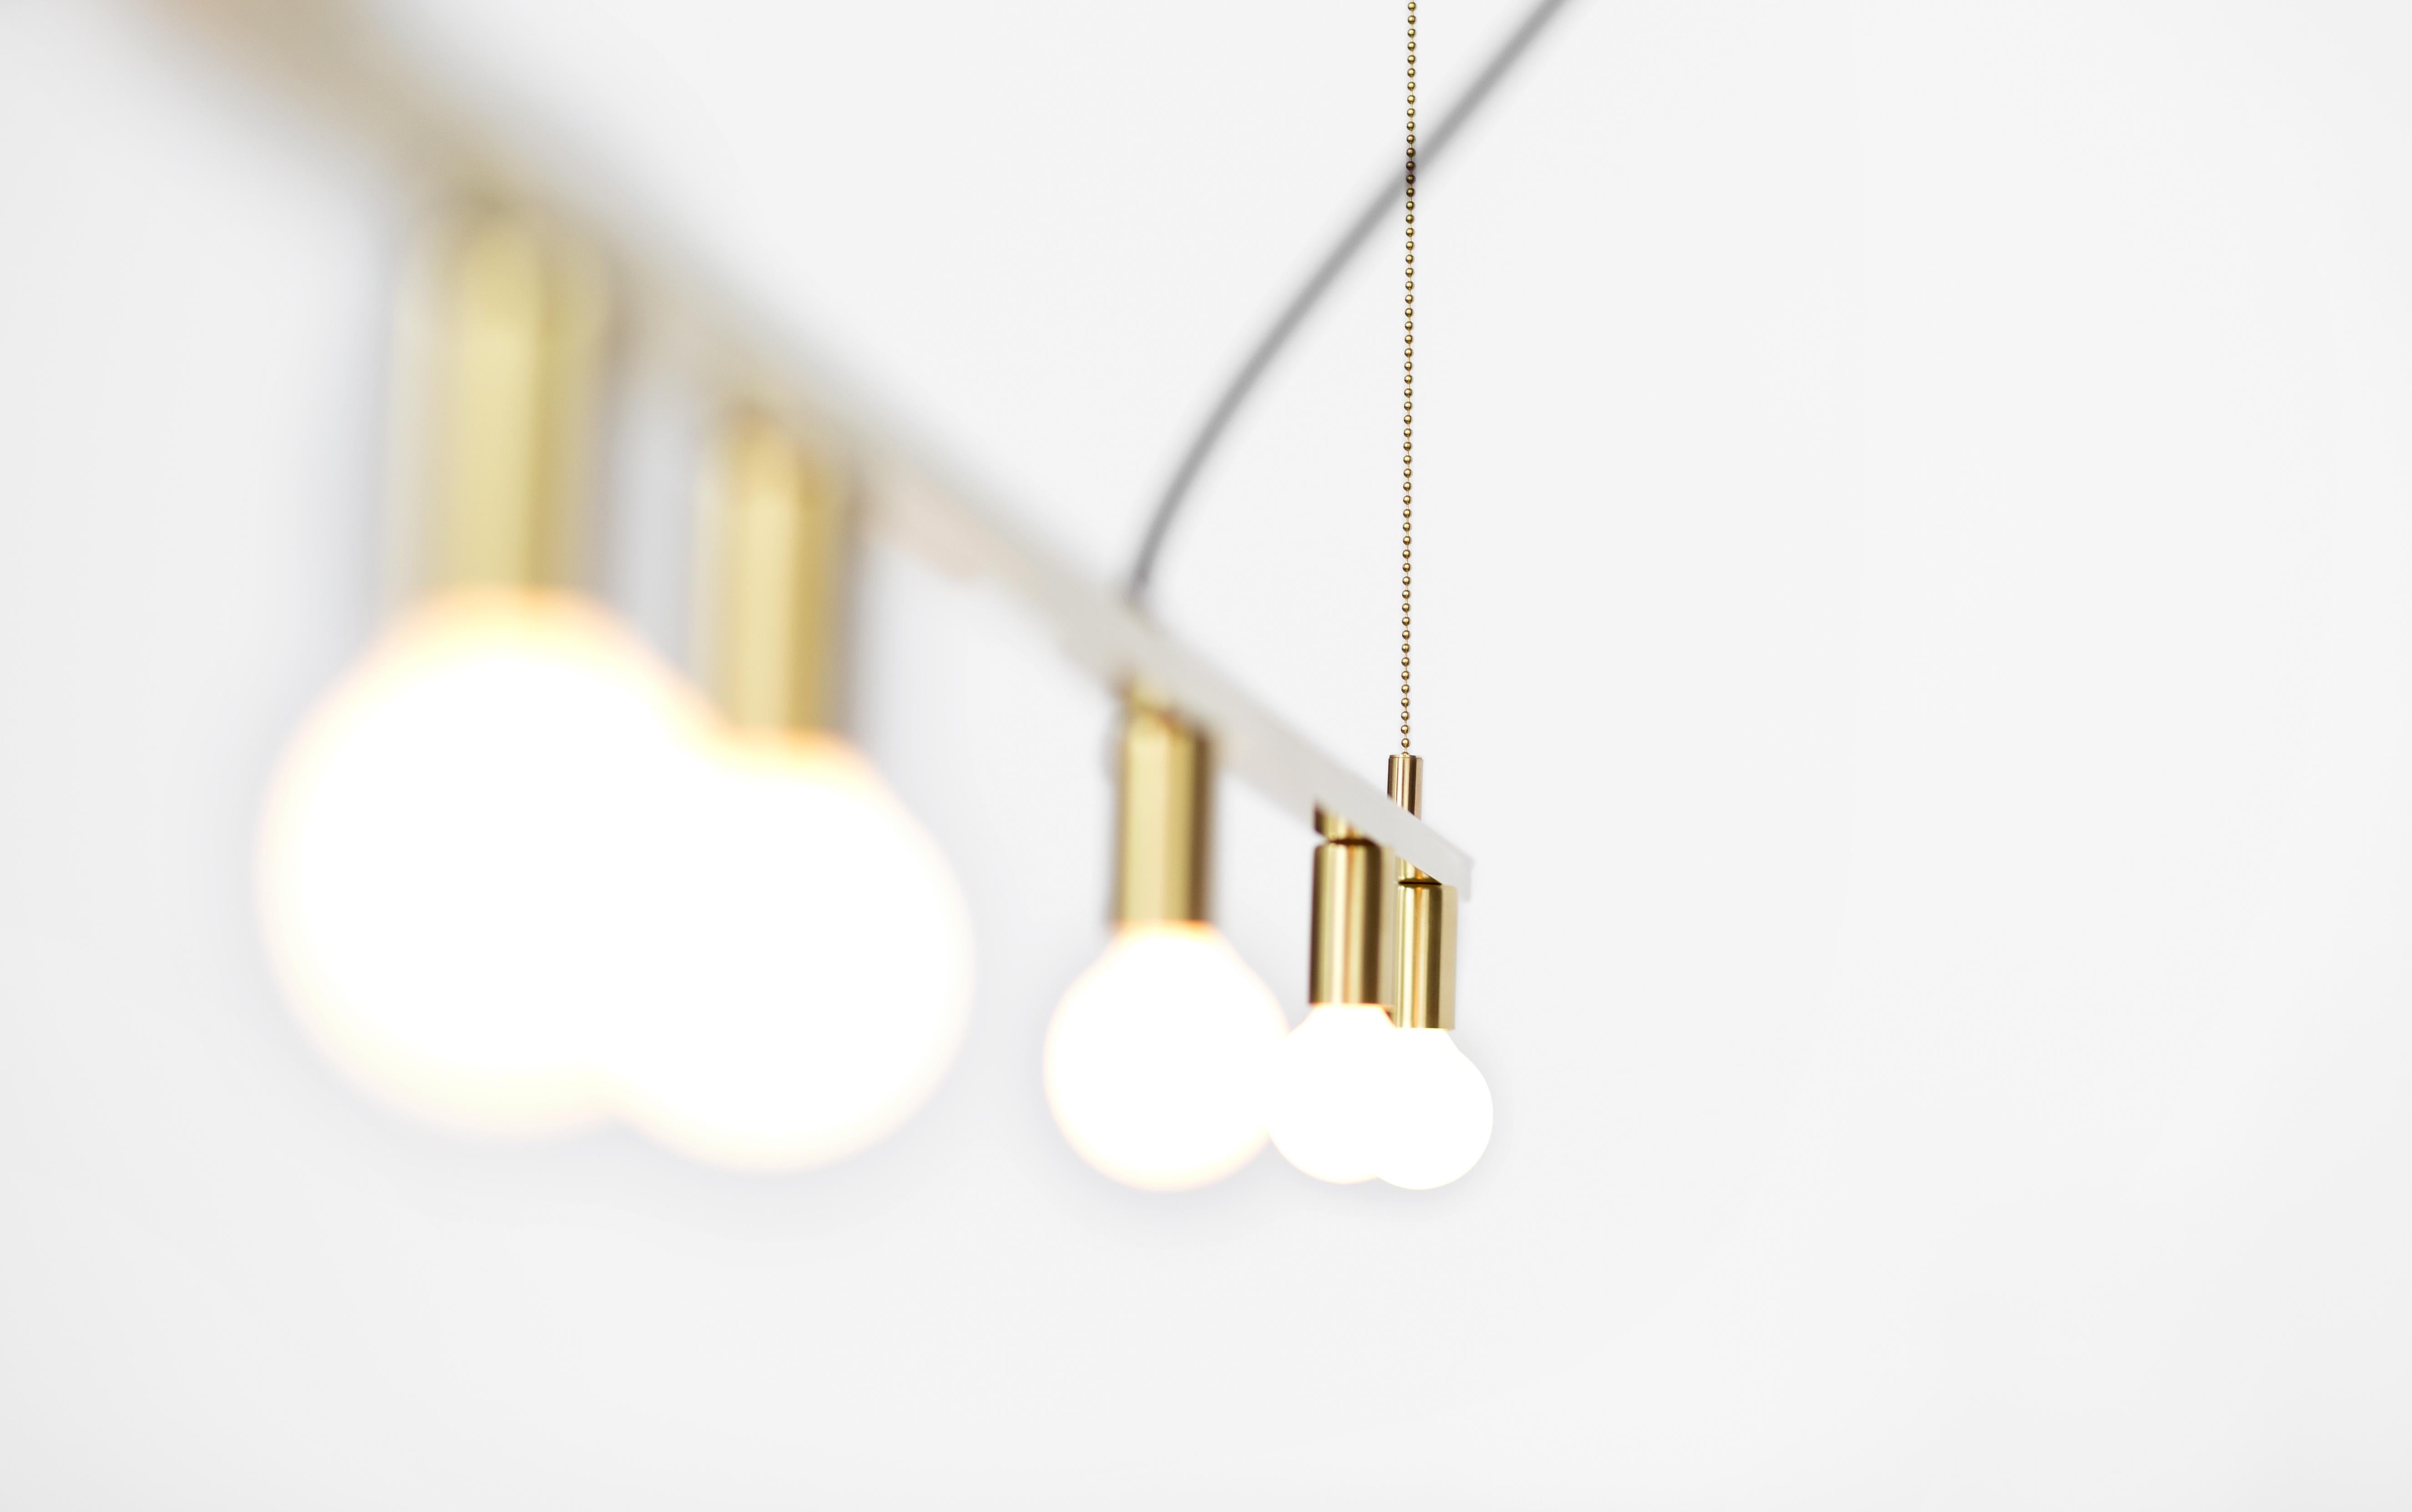 The Dot collection combines the directness of exposed, spherical bulbs with the rich materiality of brass. Focused, geometric compositions contain these two features, balancing line, surface, and luminous points. The result is a collection of lamps